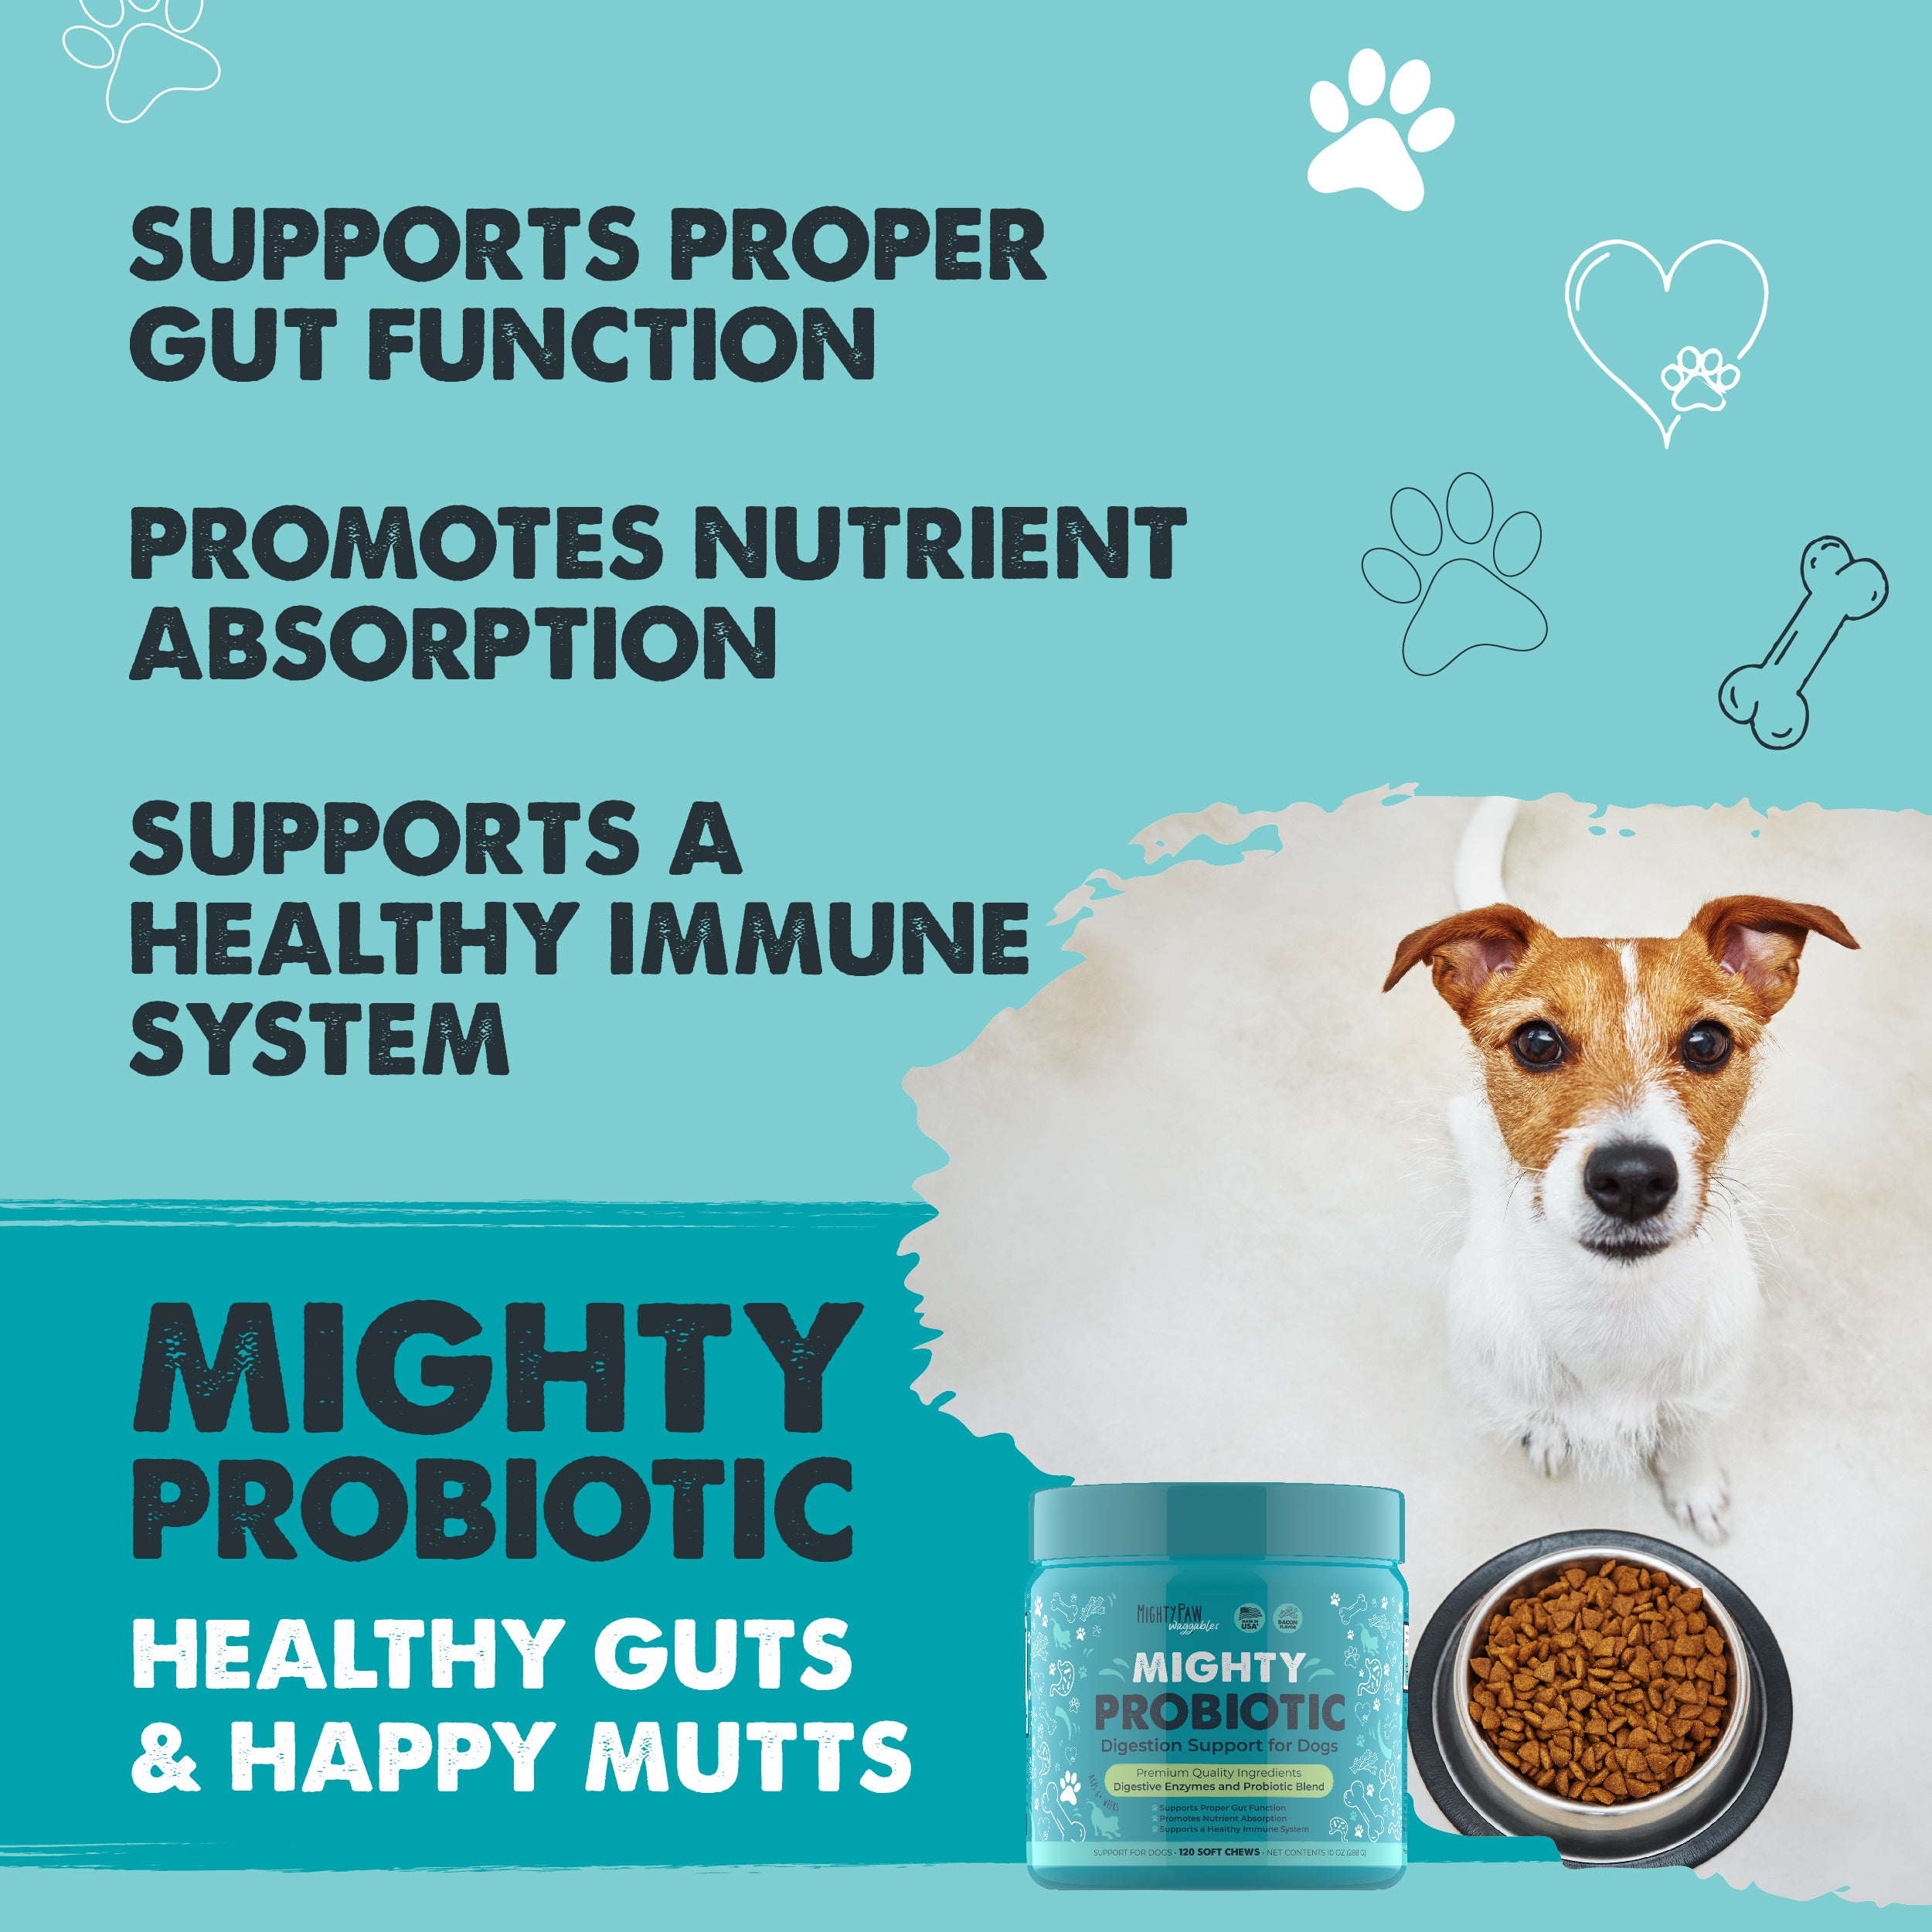 Mighty Paw Probiotic Chews for Dogs - Bacon-Flavored Digestion Support Supplement